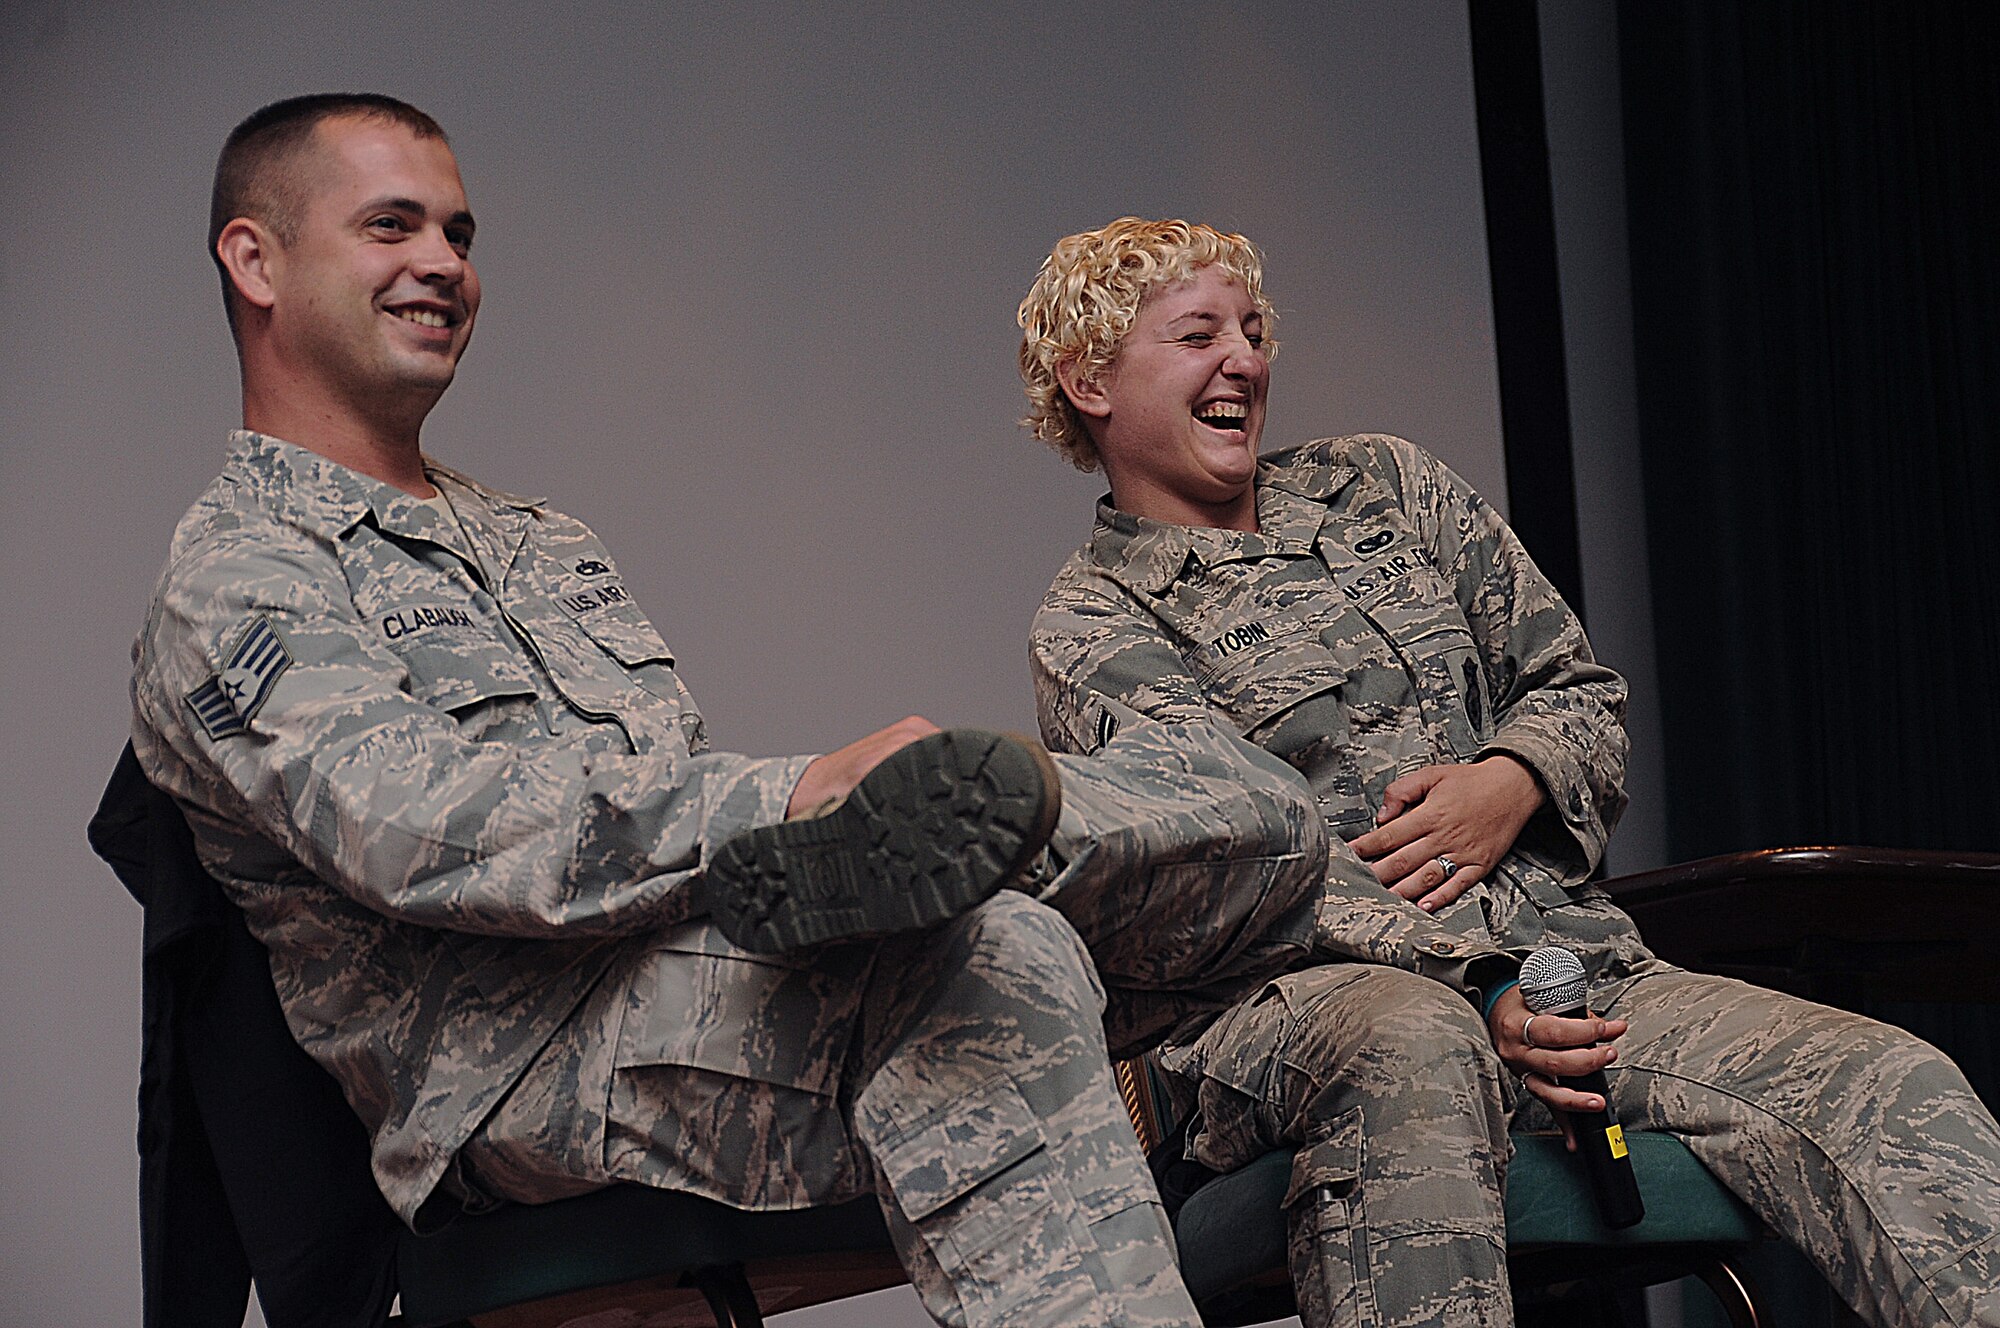 Staff Sgt. William Clabaugh, 36th Maintenance Squadron armament team member, and Airman 1st Class Elizabeth Tobin, 36th Security Forces Squadron fire team member, role play as a couple during safe dating presentation on Andersen Air Force Base, Guam, March 8, 2013. This is the second consecutive year Mike Domitrz, founder of The Date Safe Project, Inc., spoke to members of Team Andersen in his 20-year history of presentations on safe dating. To send a consistent message, Airmen of all ages, ranks and leadership positions attended this event. (U.S. Air Force photo by Airman 1st Class Adarius Petty/Released)